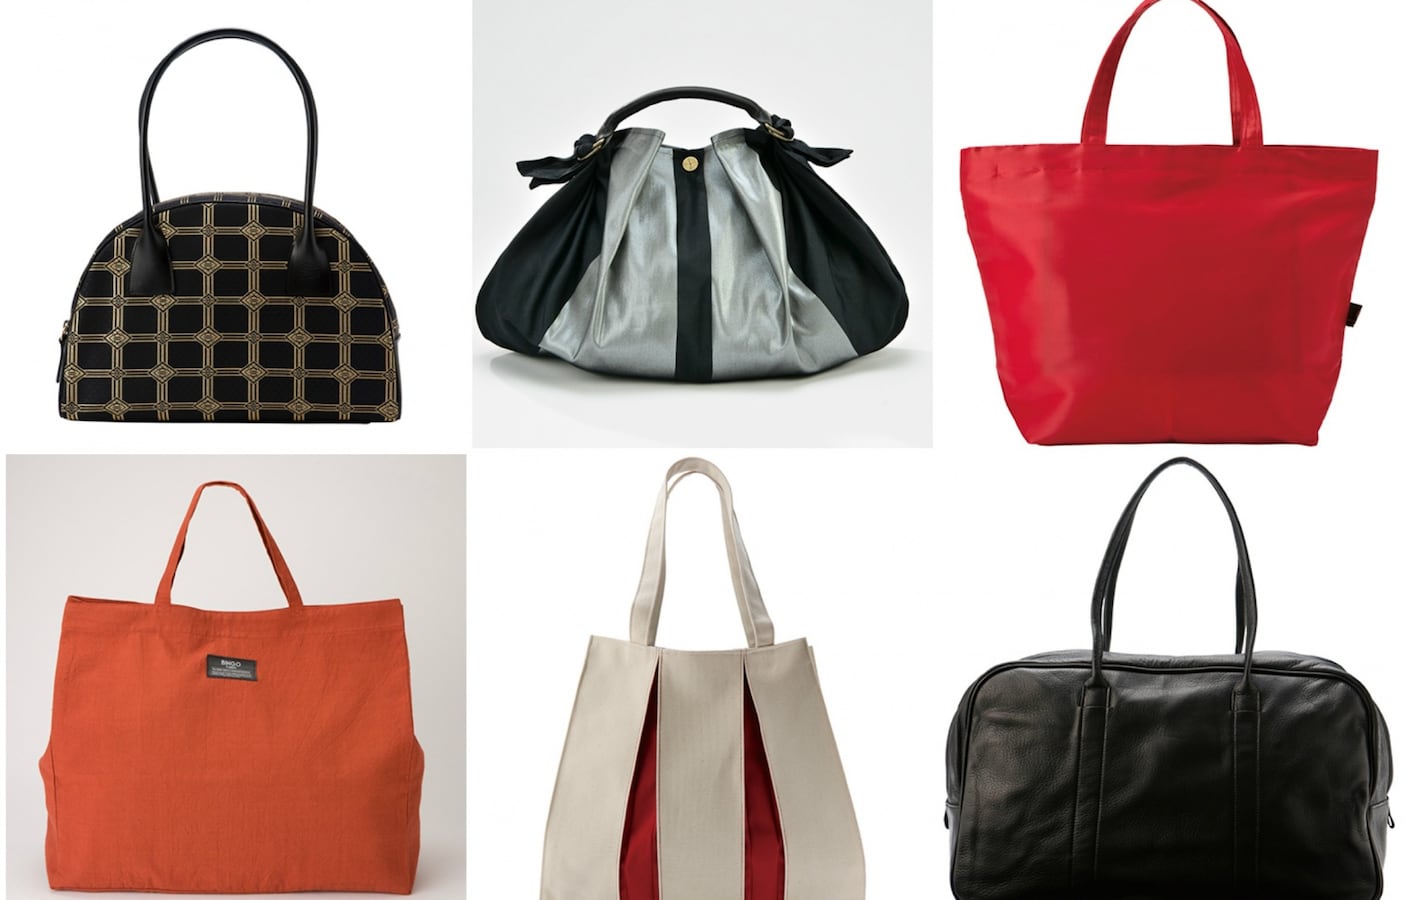 Top 19 Japanese Bag Brands You Should Know (All Made in Japan)